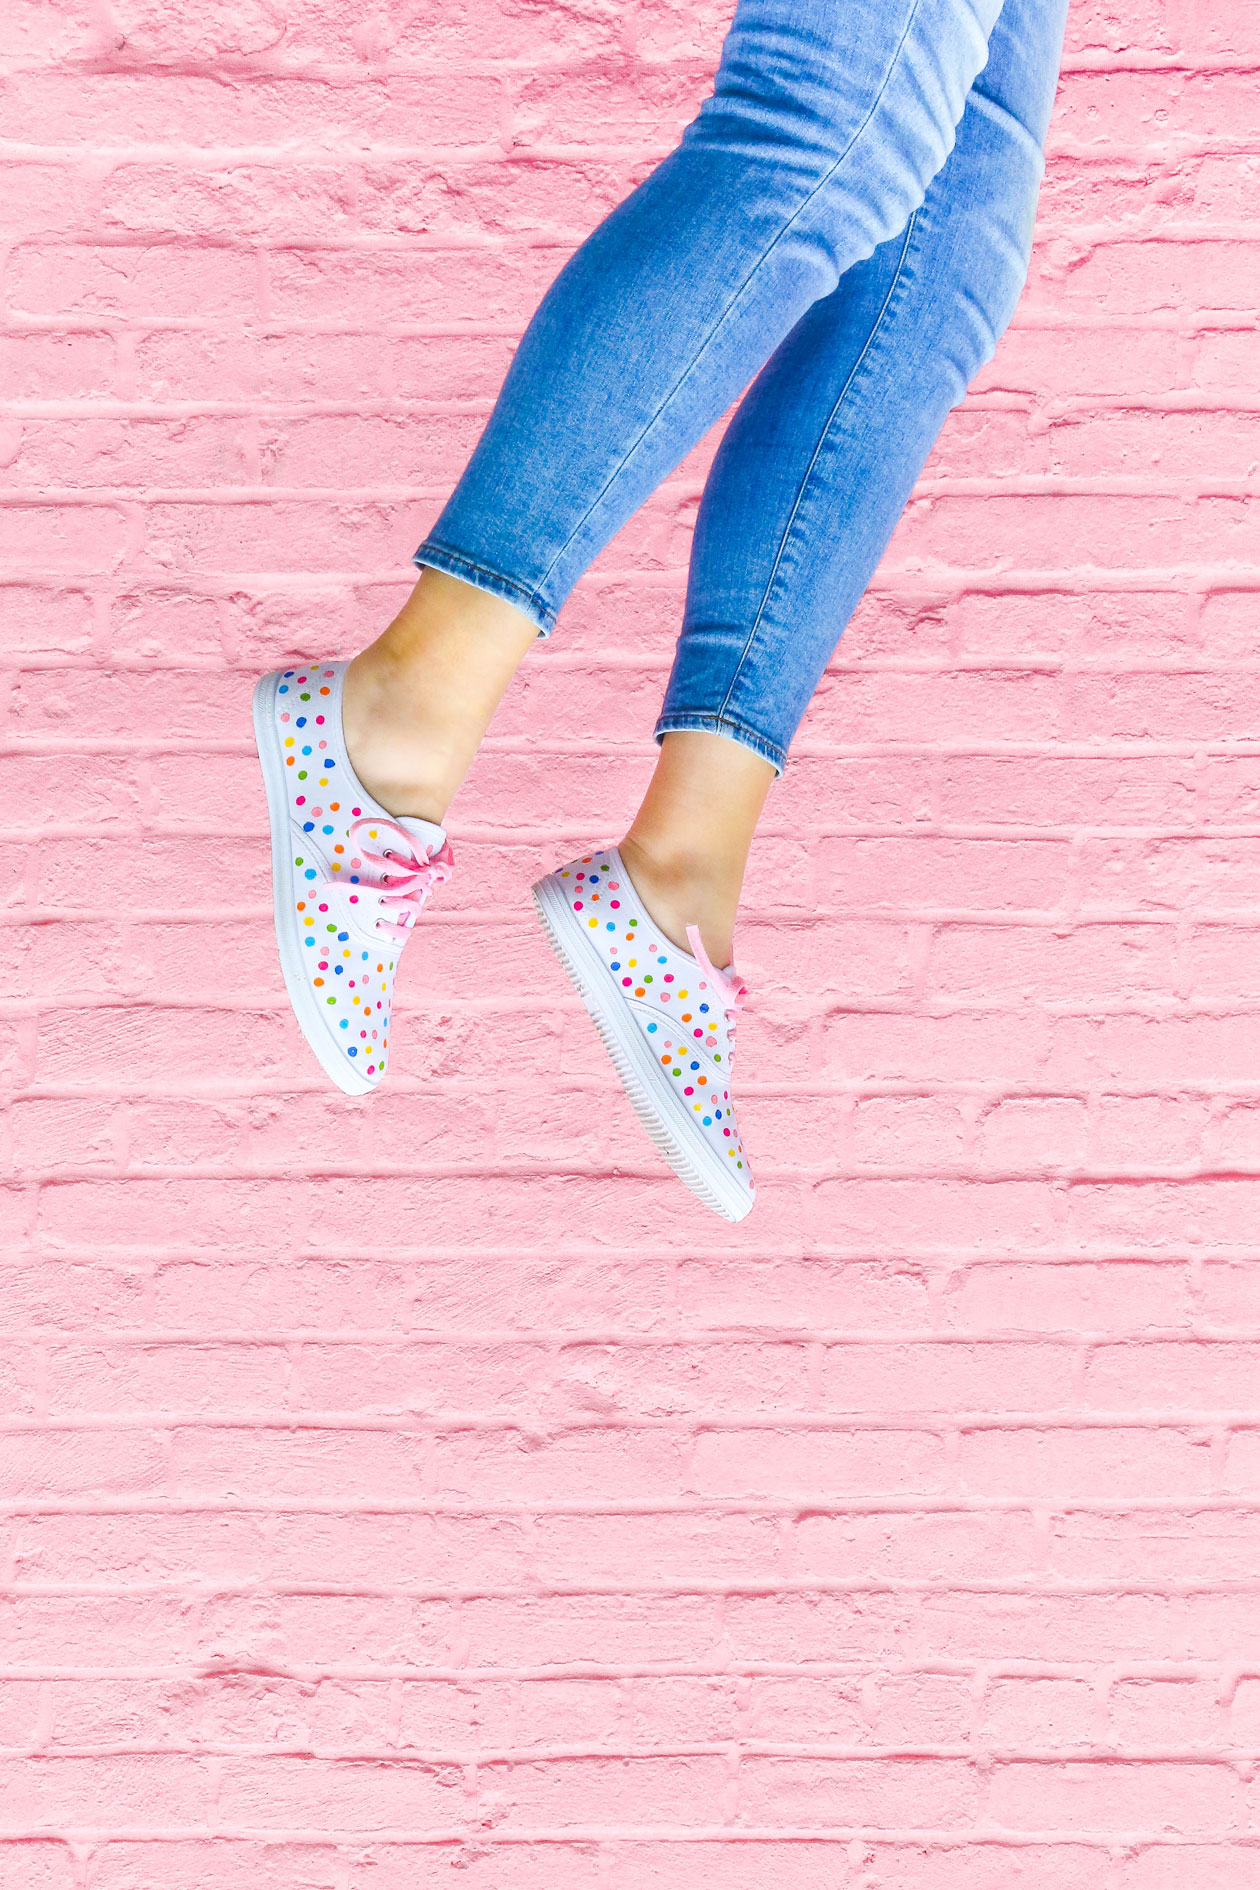 Want Kate Spade Shoes but don't have the budget? Try this easy DIY! Add color to your step with these DIY Confetti Shoes! Polka dot shoes every looked this cute.